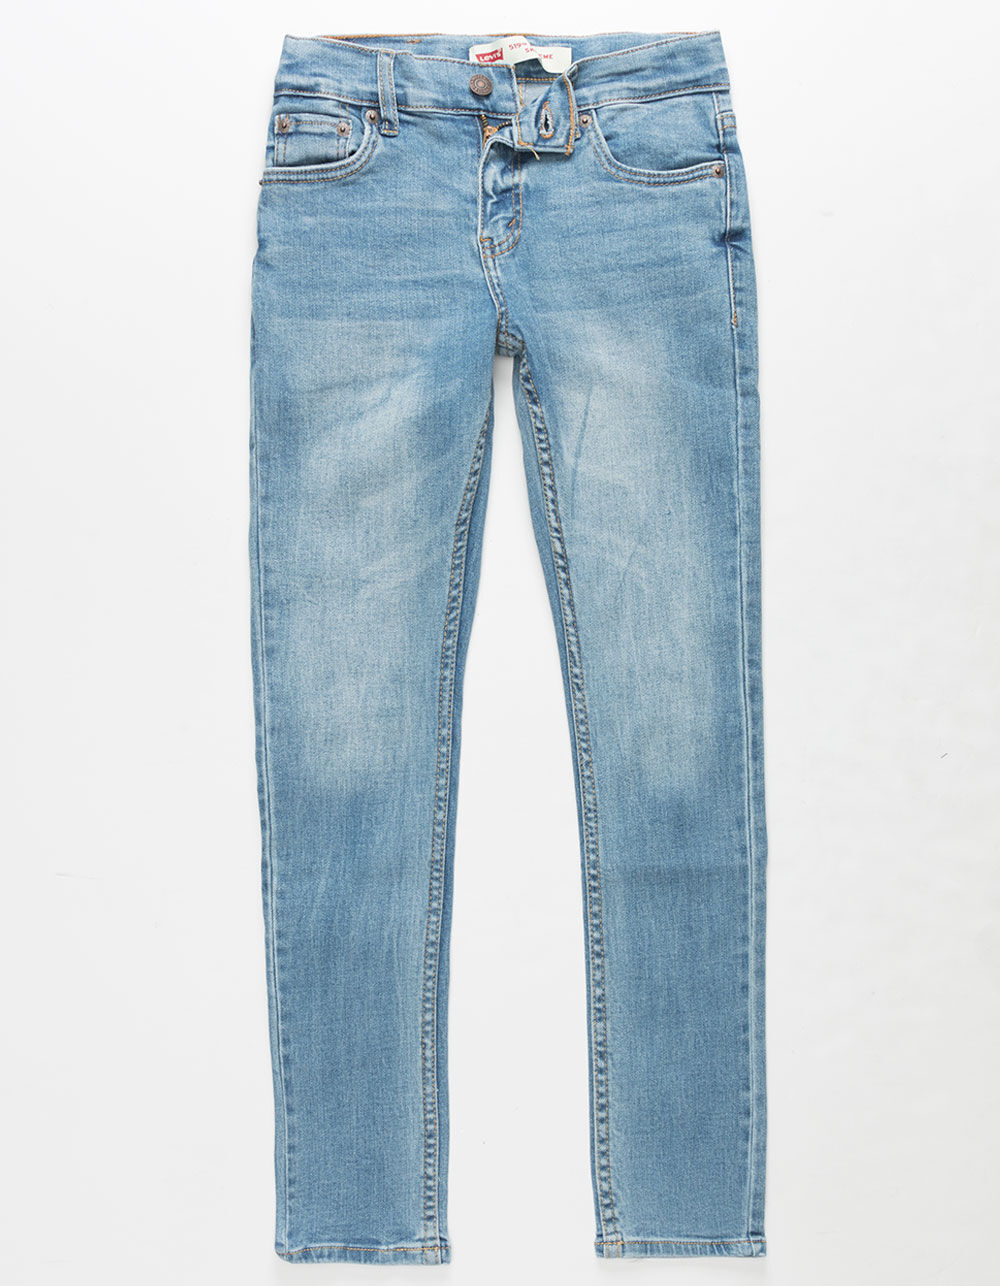 LEVI'S 519 Extreme Skinny Boys Stretch Jeans image number 0